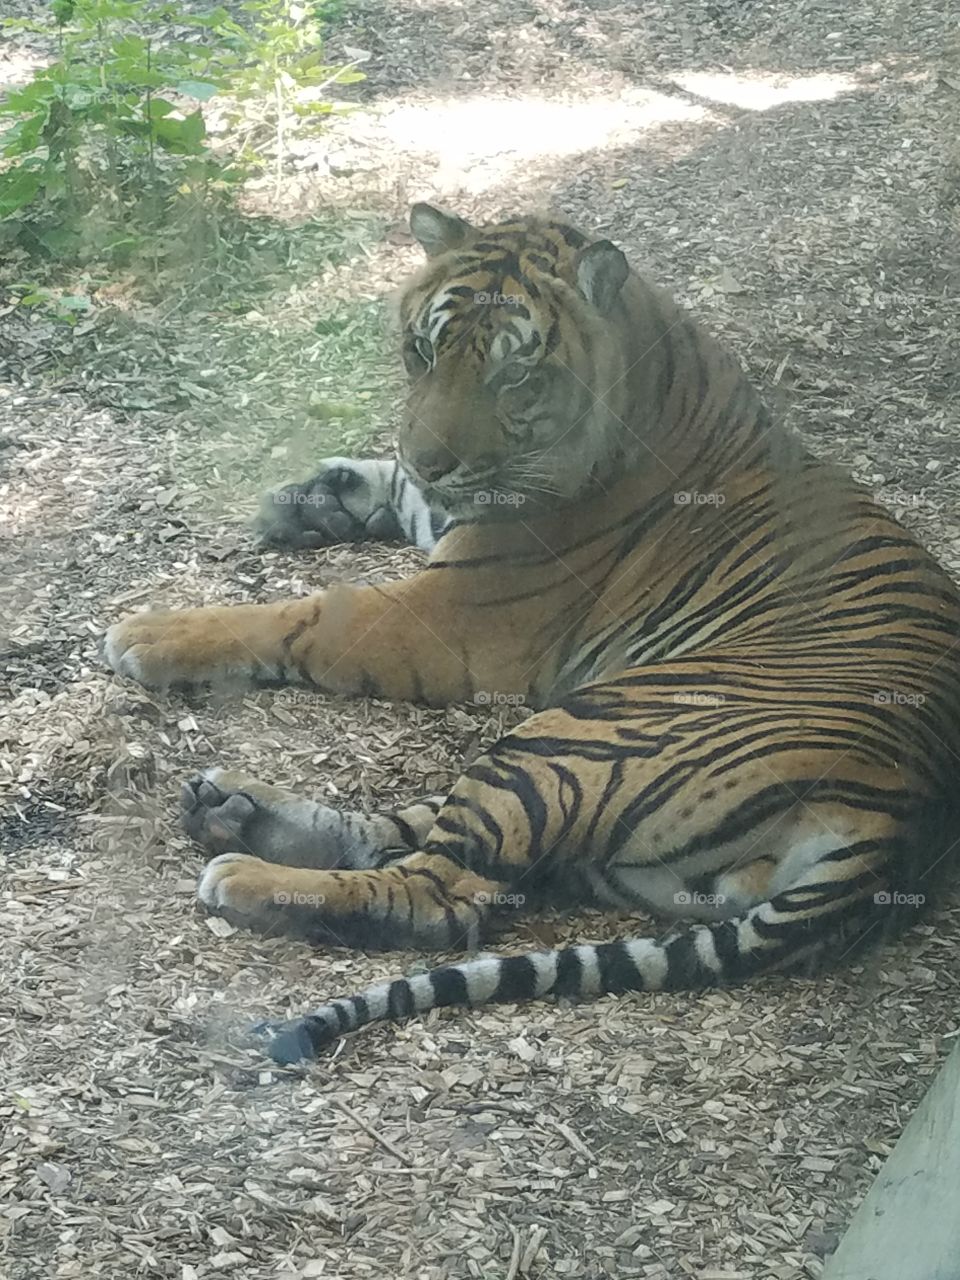 bored tiger in a zoo